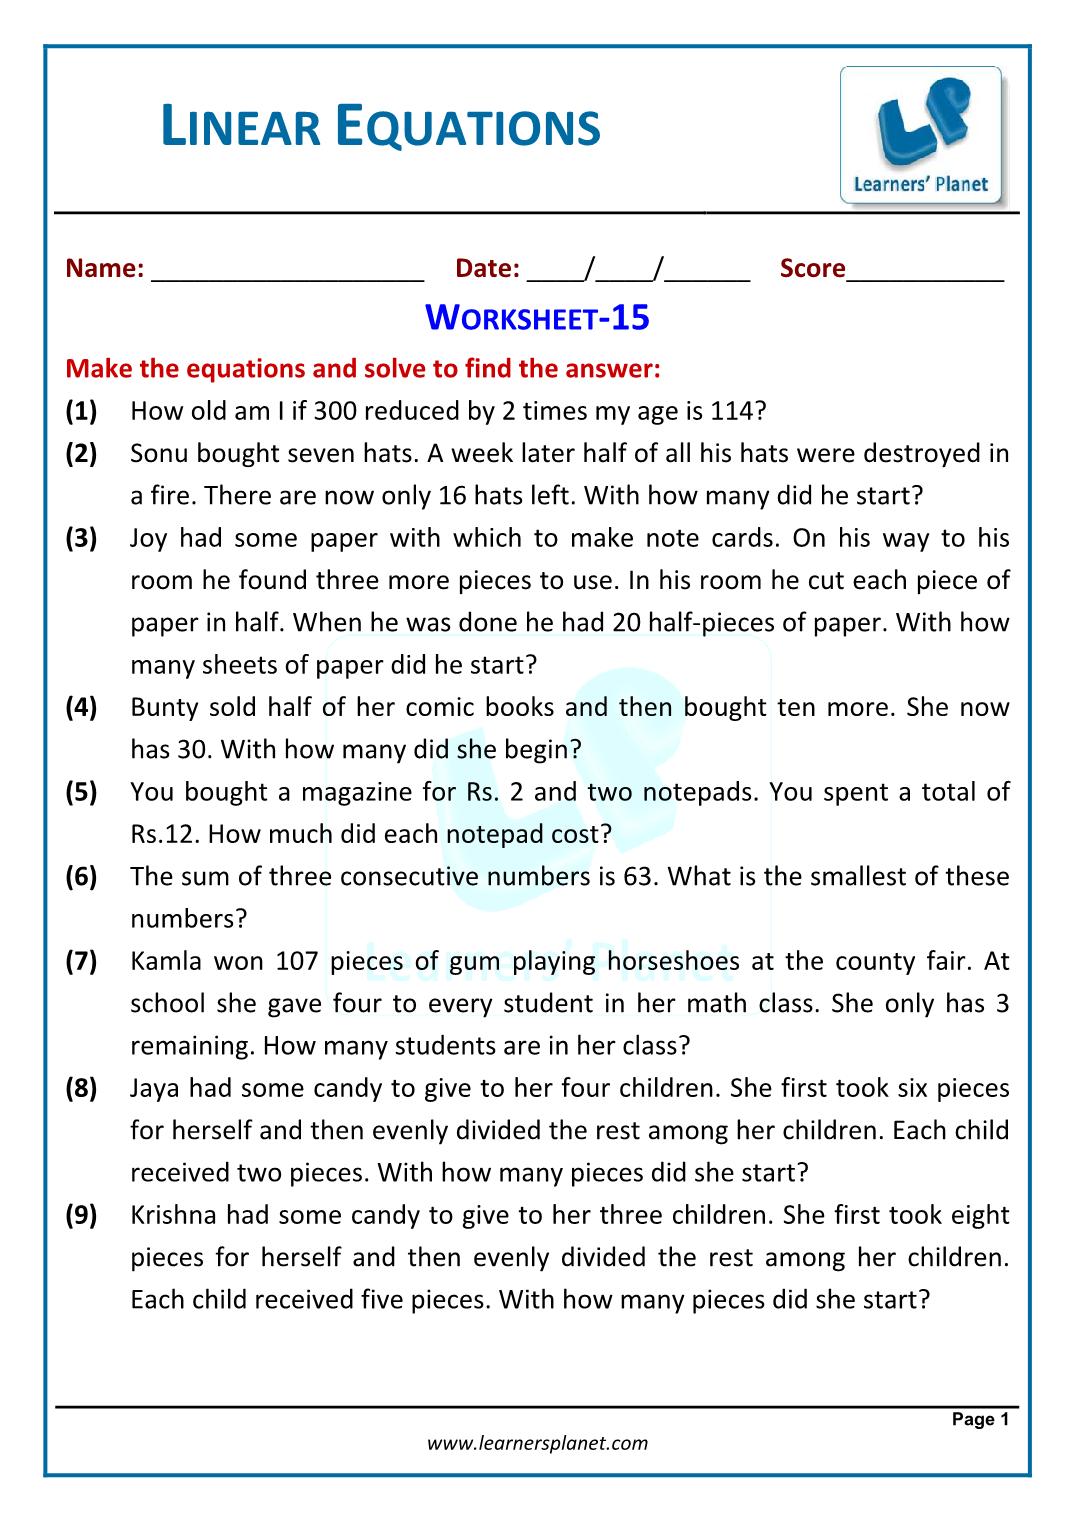 Linear equation word problems worksheet with answer With Regard To Linear Equation Word Problems Worksheet